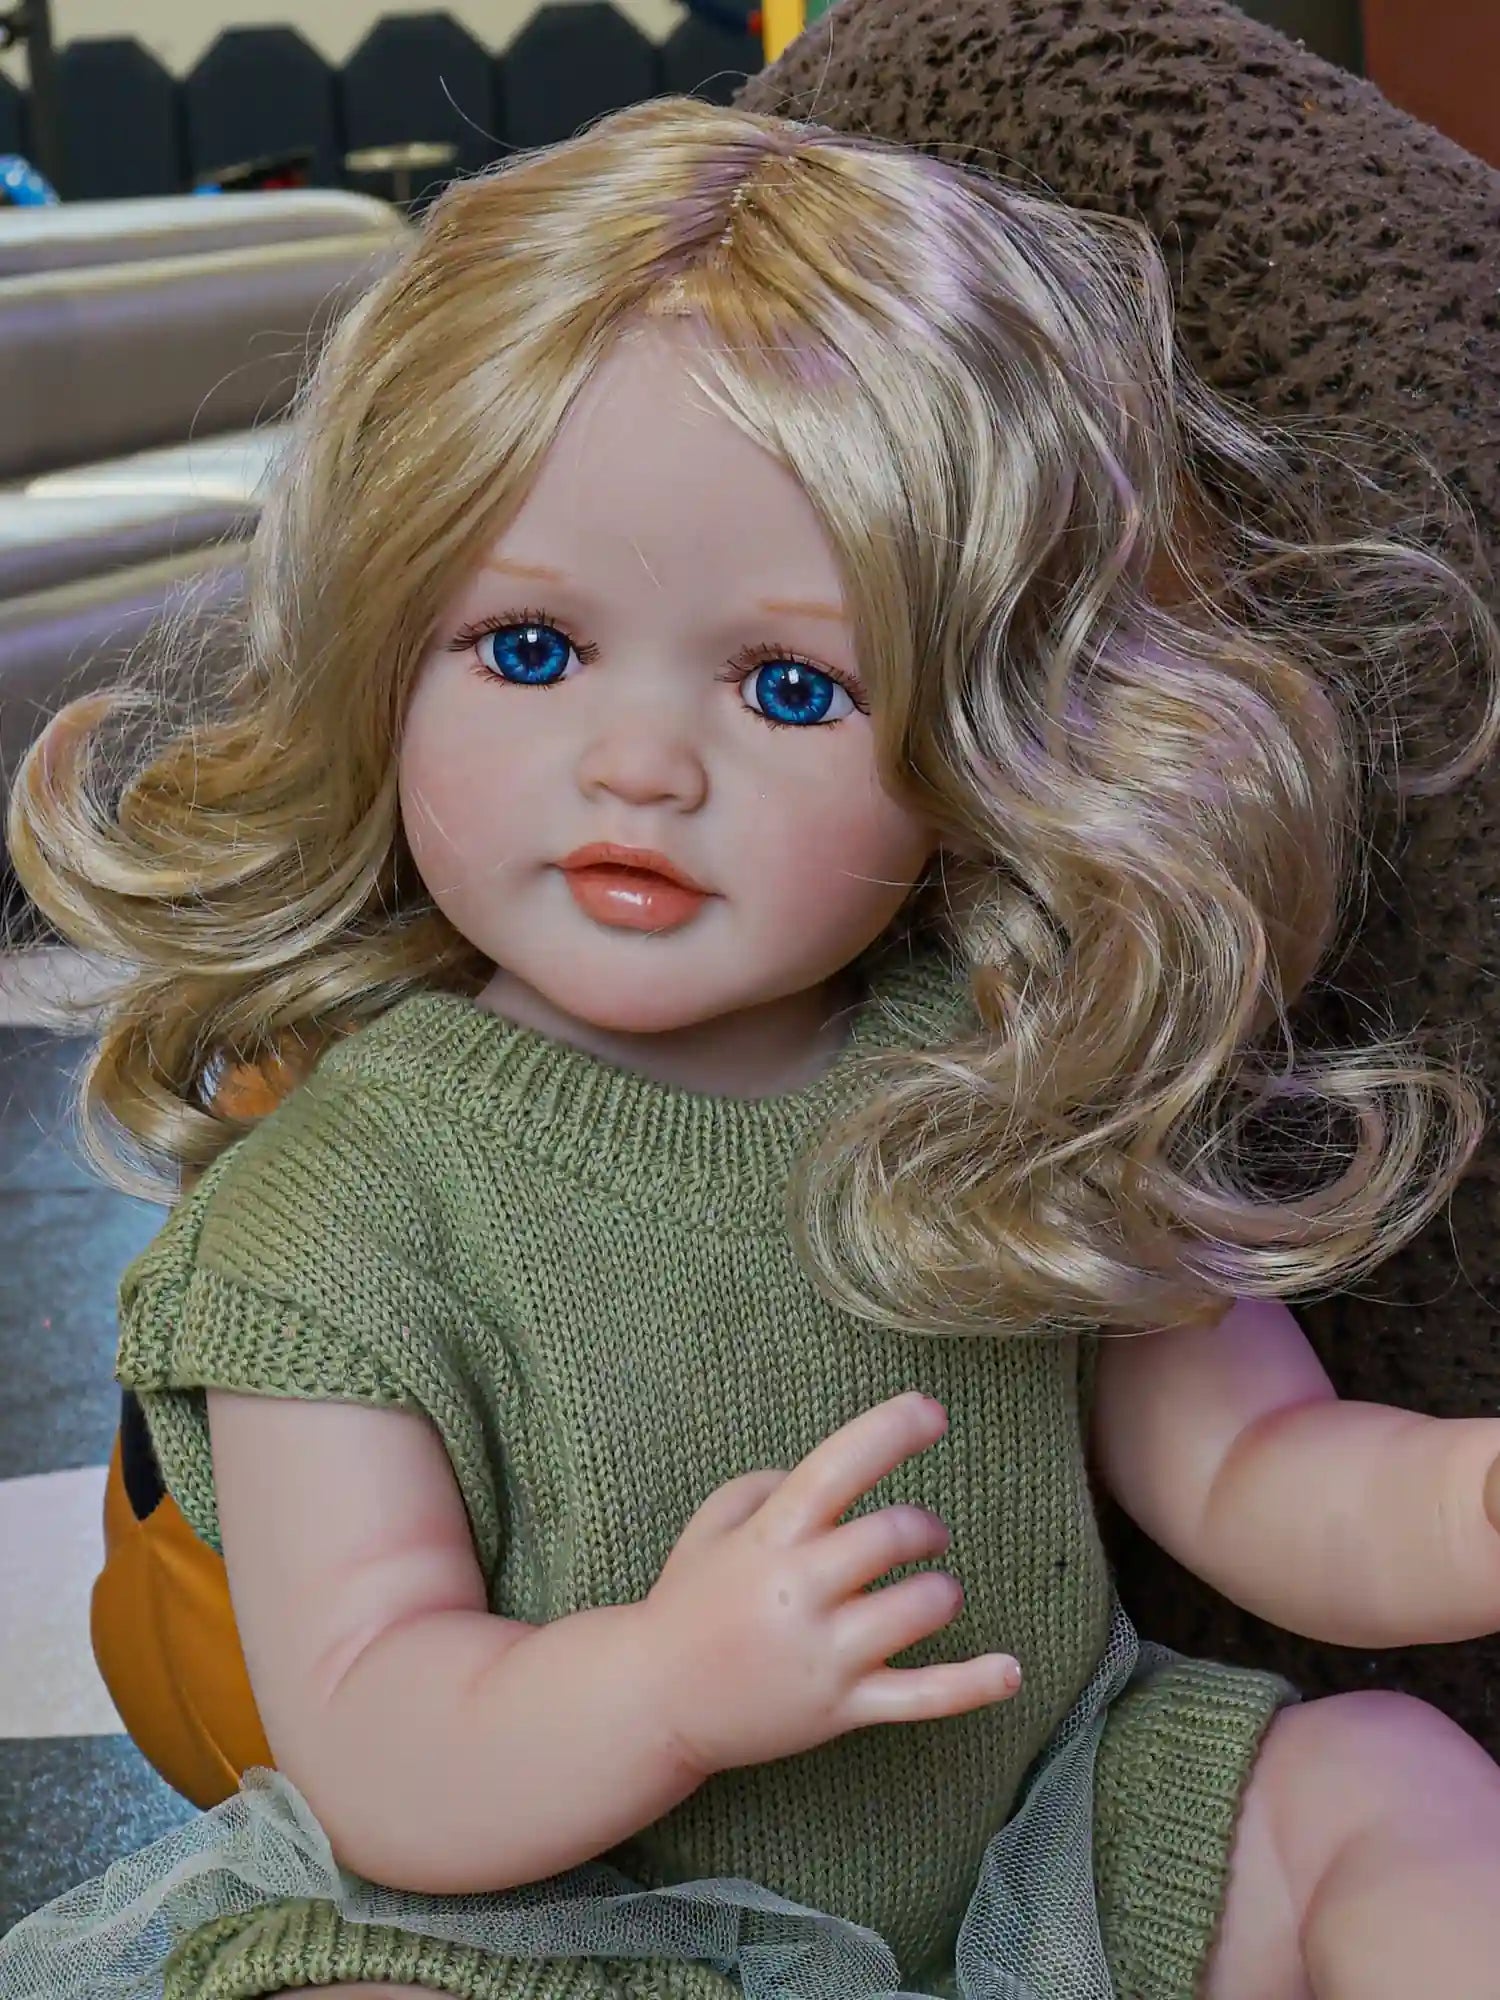 Chimidoll-cute toddler doll with green outfit, yellow hair, and blue eyes